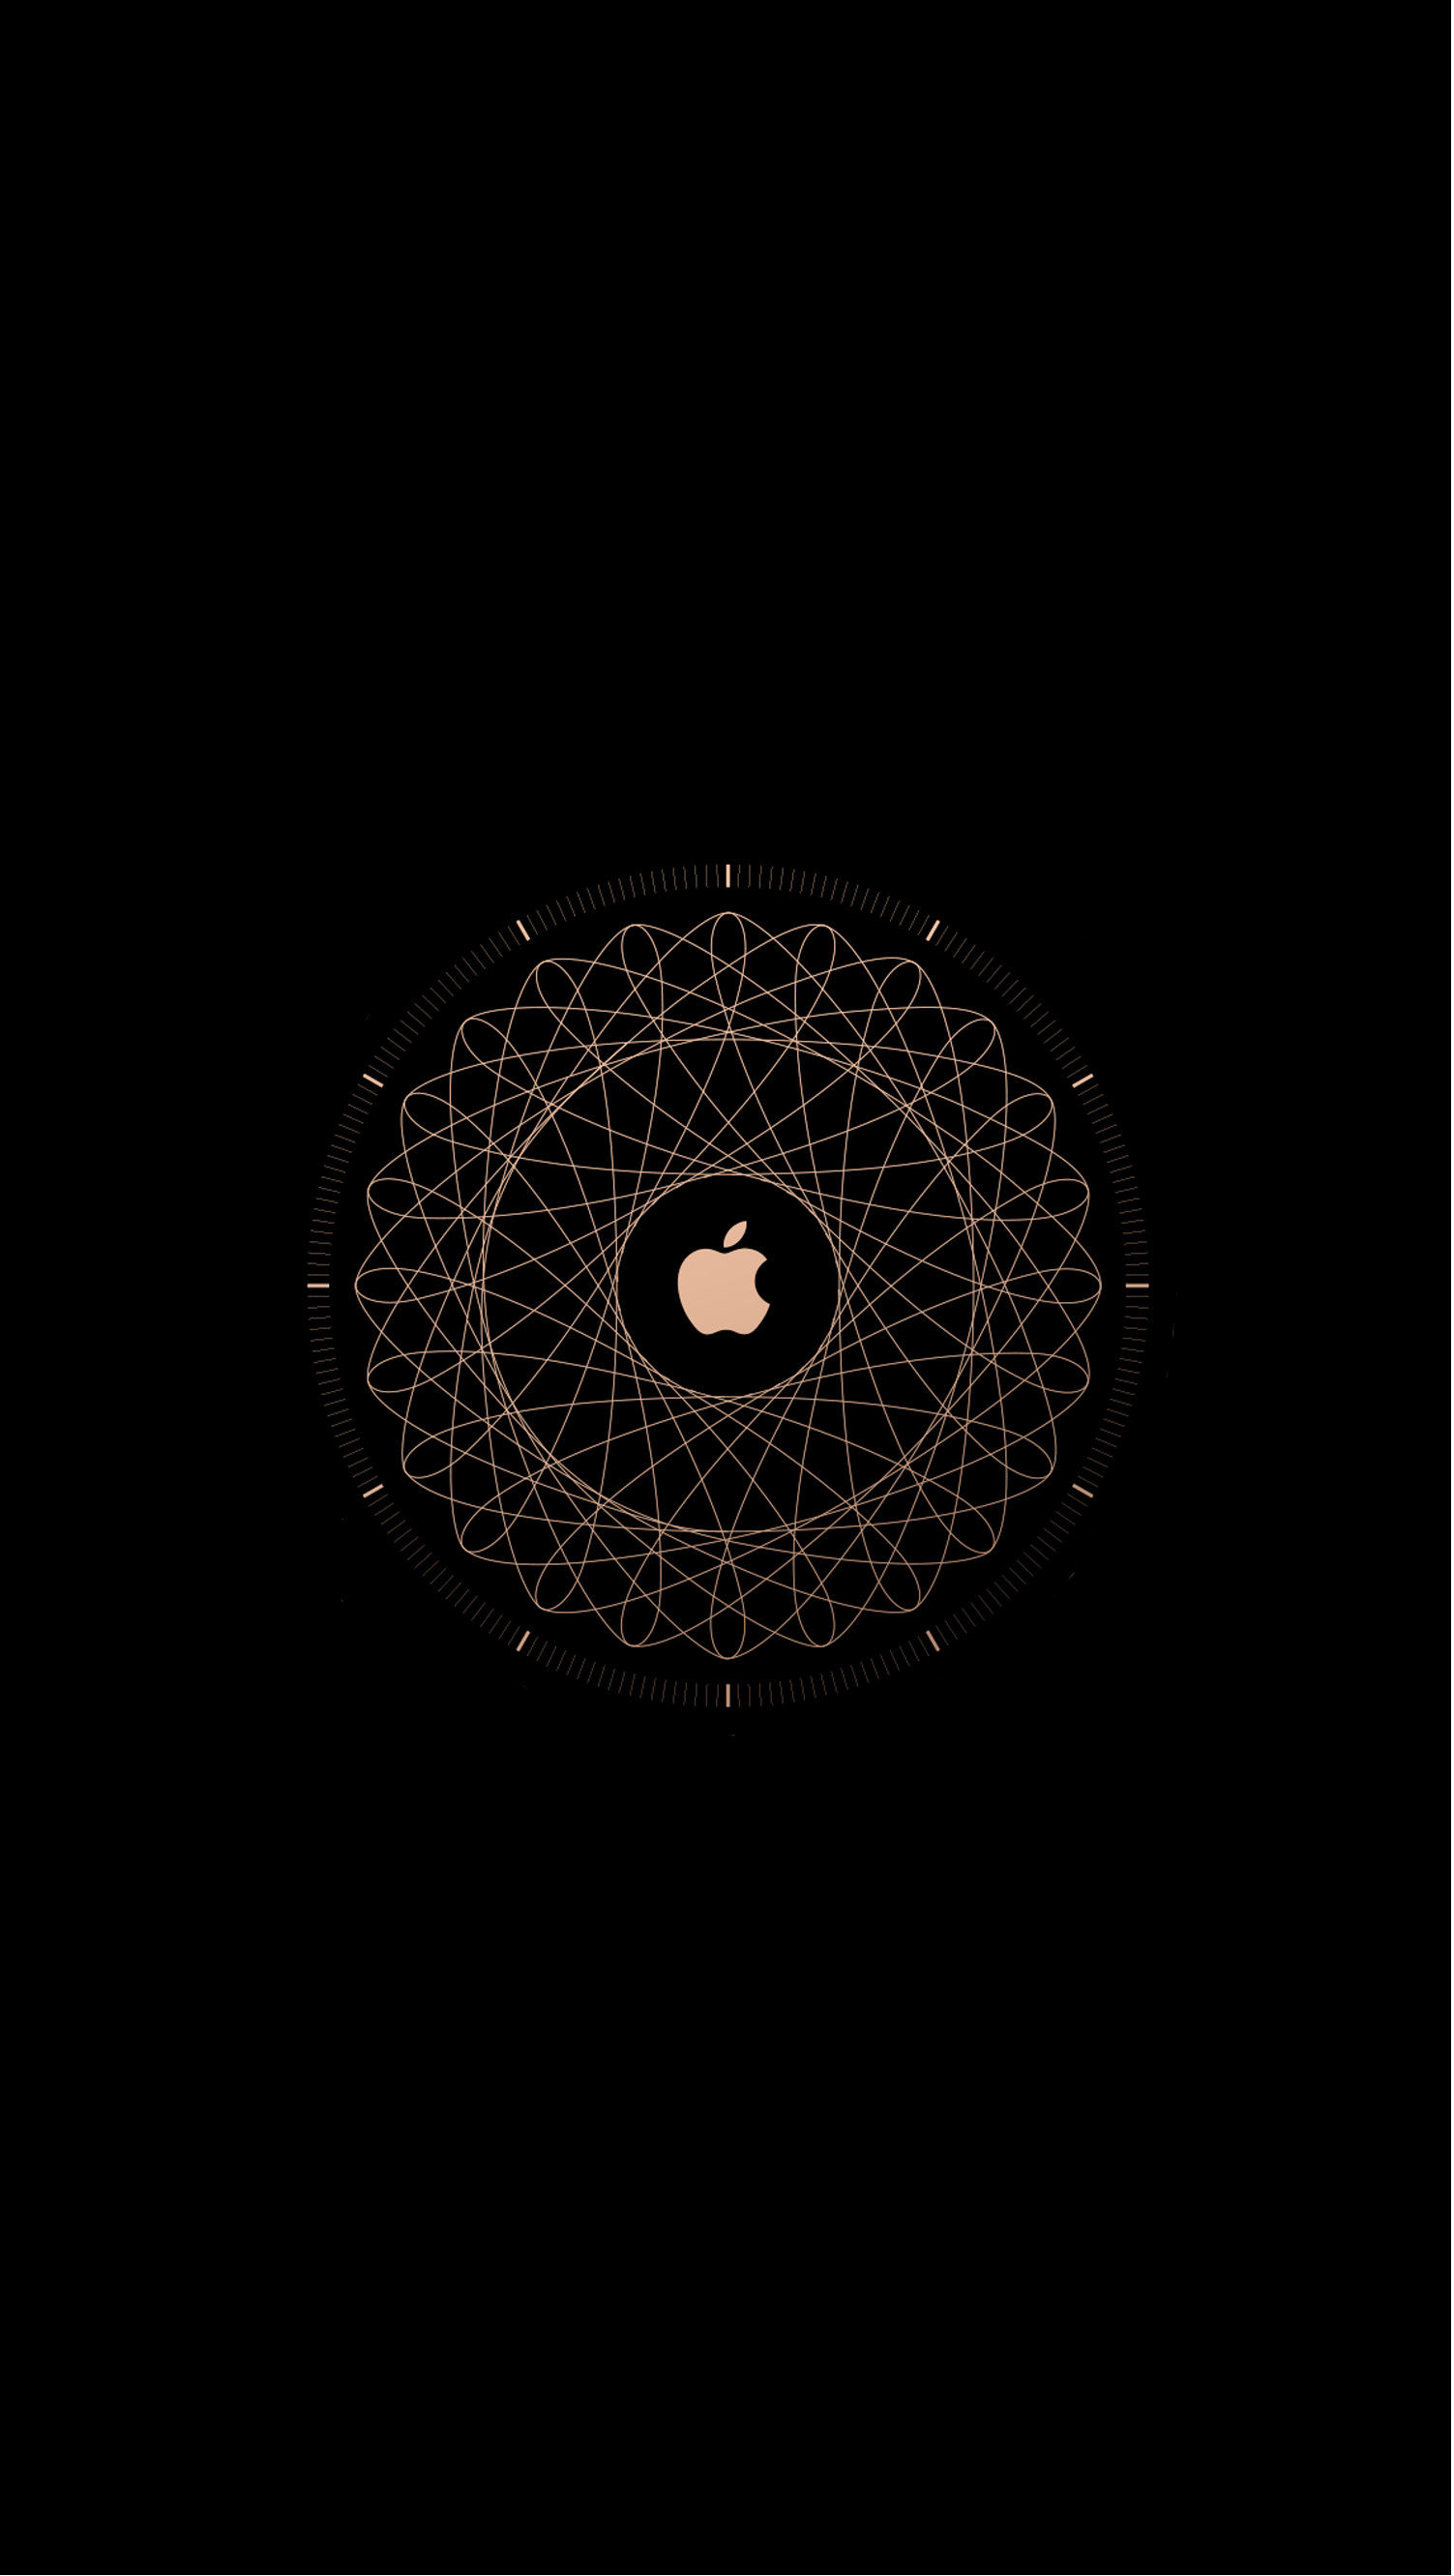 A black background with the apple logo on it - Apple Watch